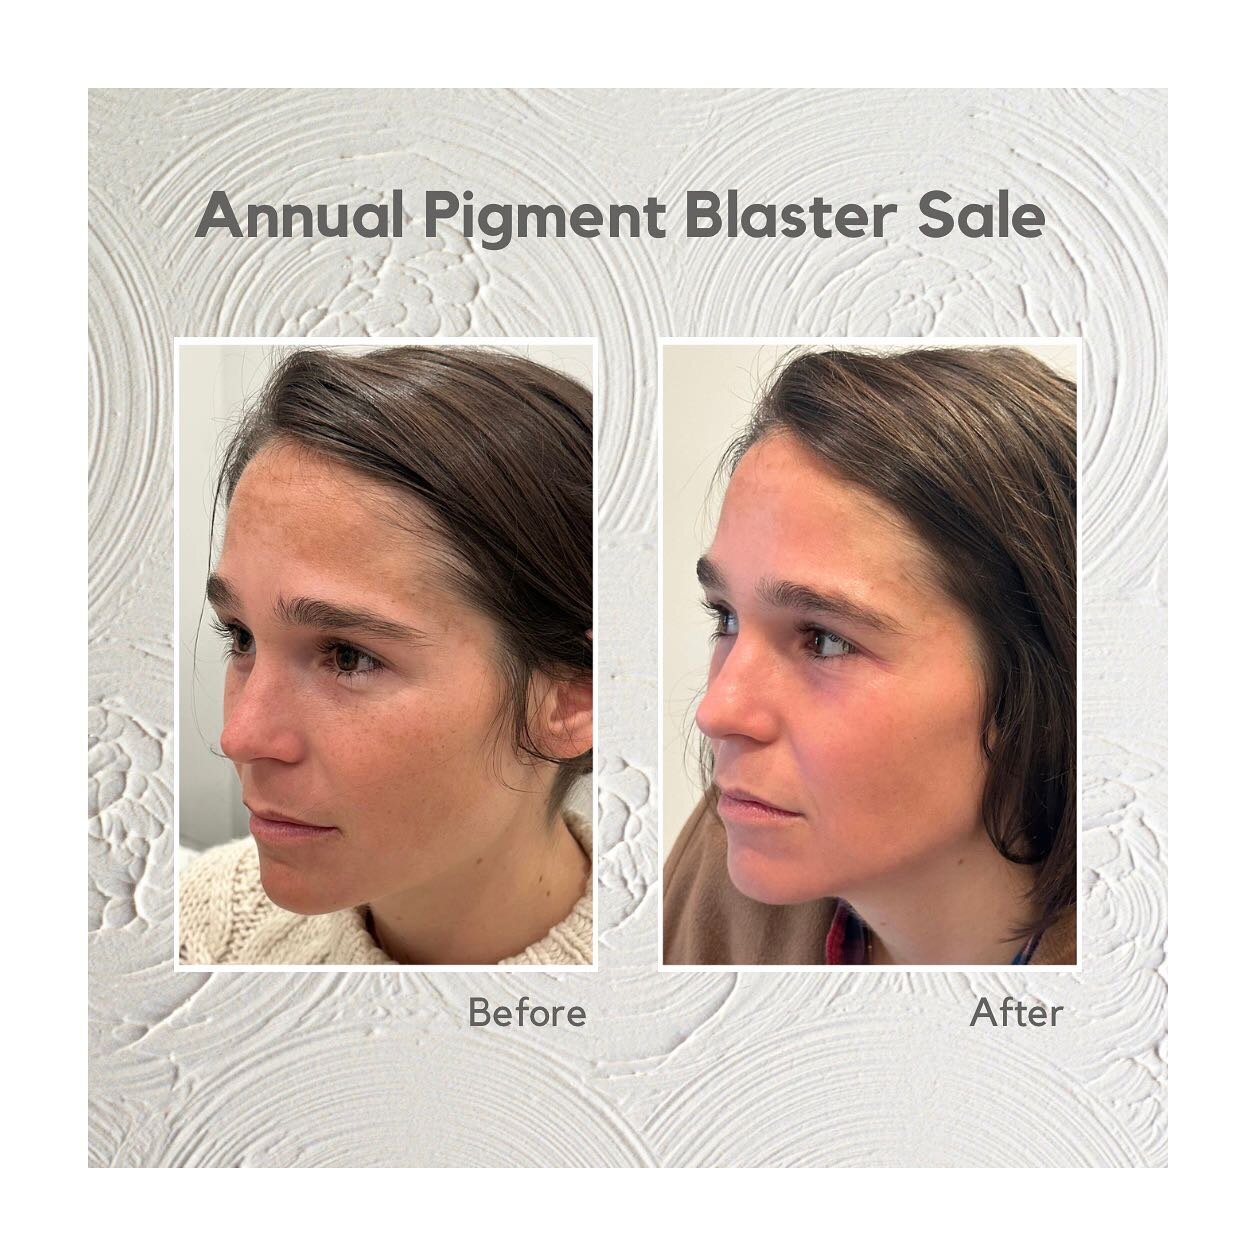 Annual pigment blaster special ☀️ 

🚨 Laser + Chemical Peel SALE 🚨 

20%-30% off during October and November (details below)

Goodbye sun damaged skin, hello dewy youthful glow. 

Purify your skin from another season of too much fun in the sun. Whe